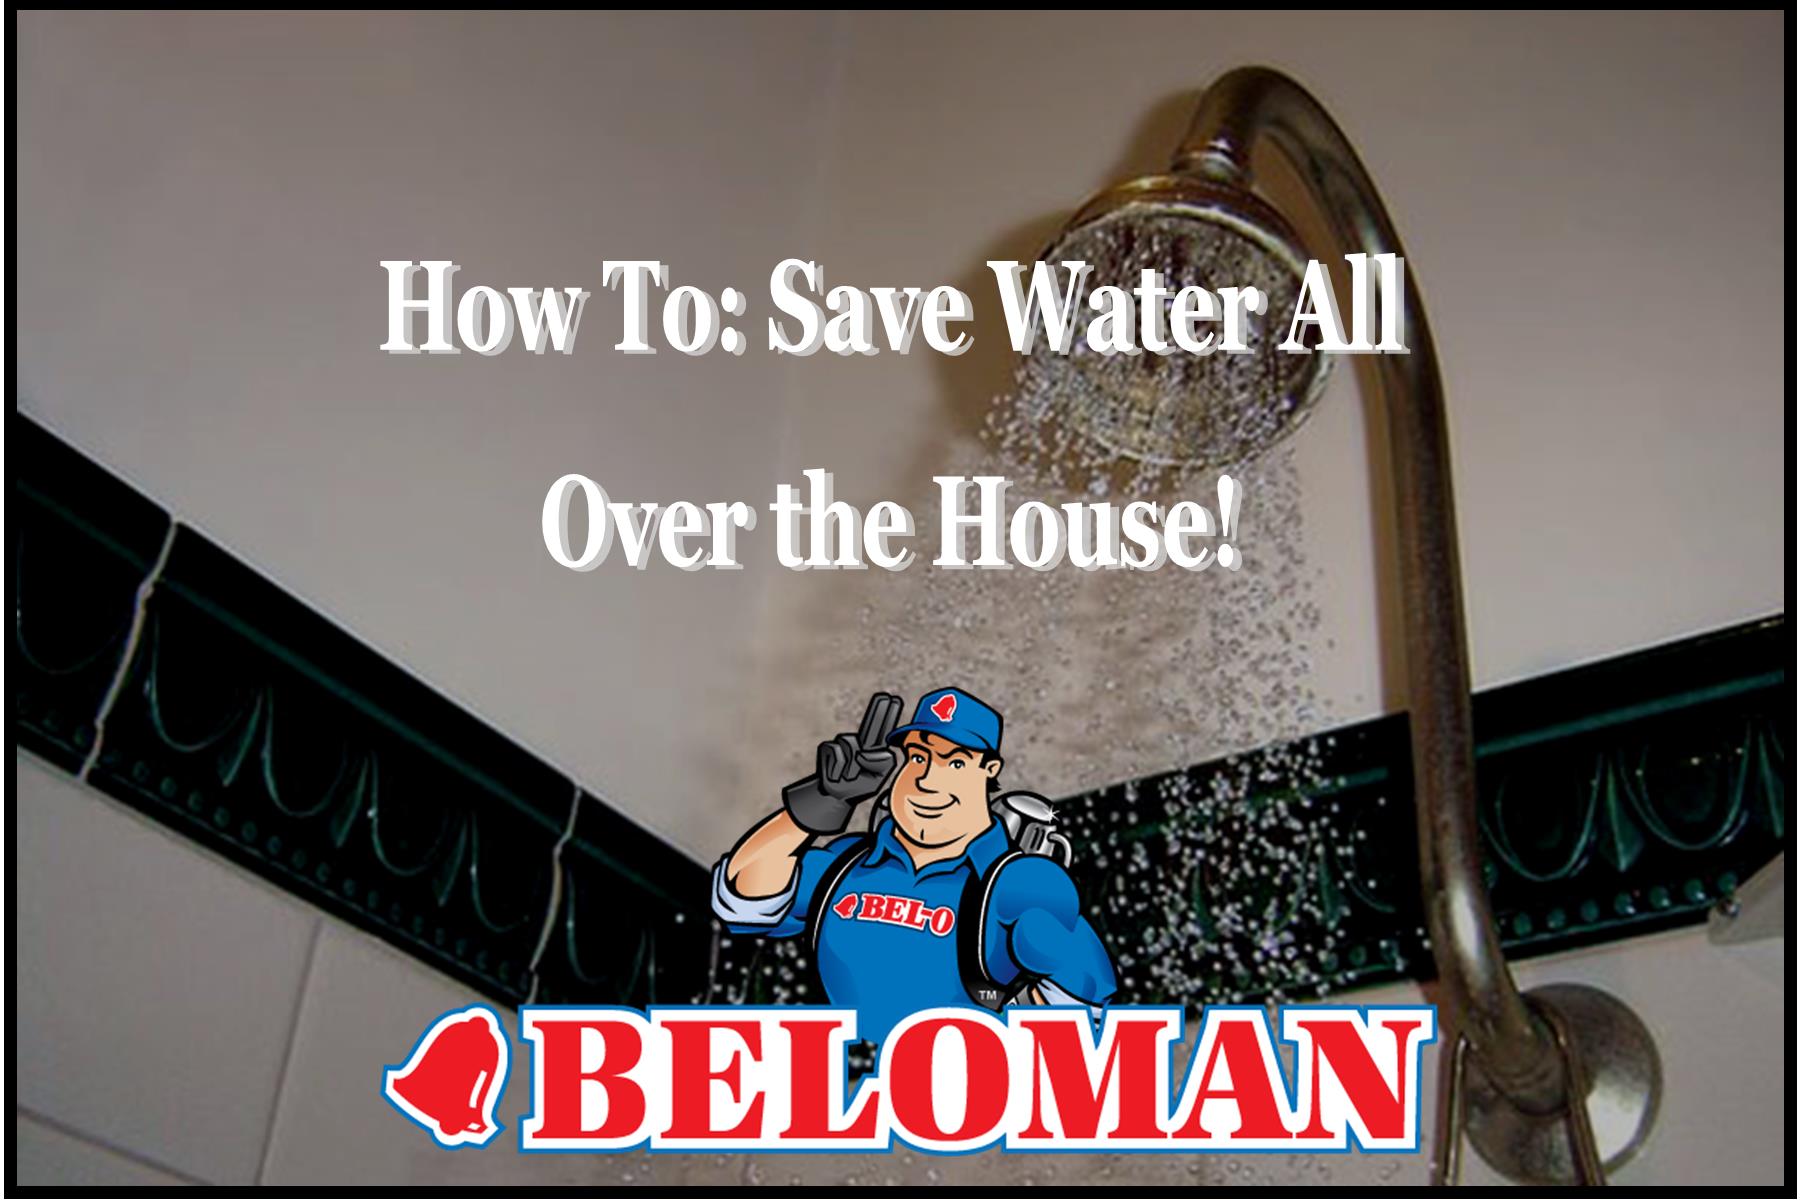 b-77-save-water-all-over-the-home